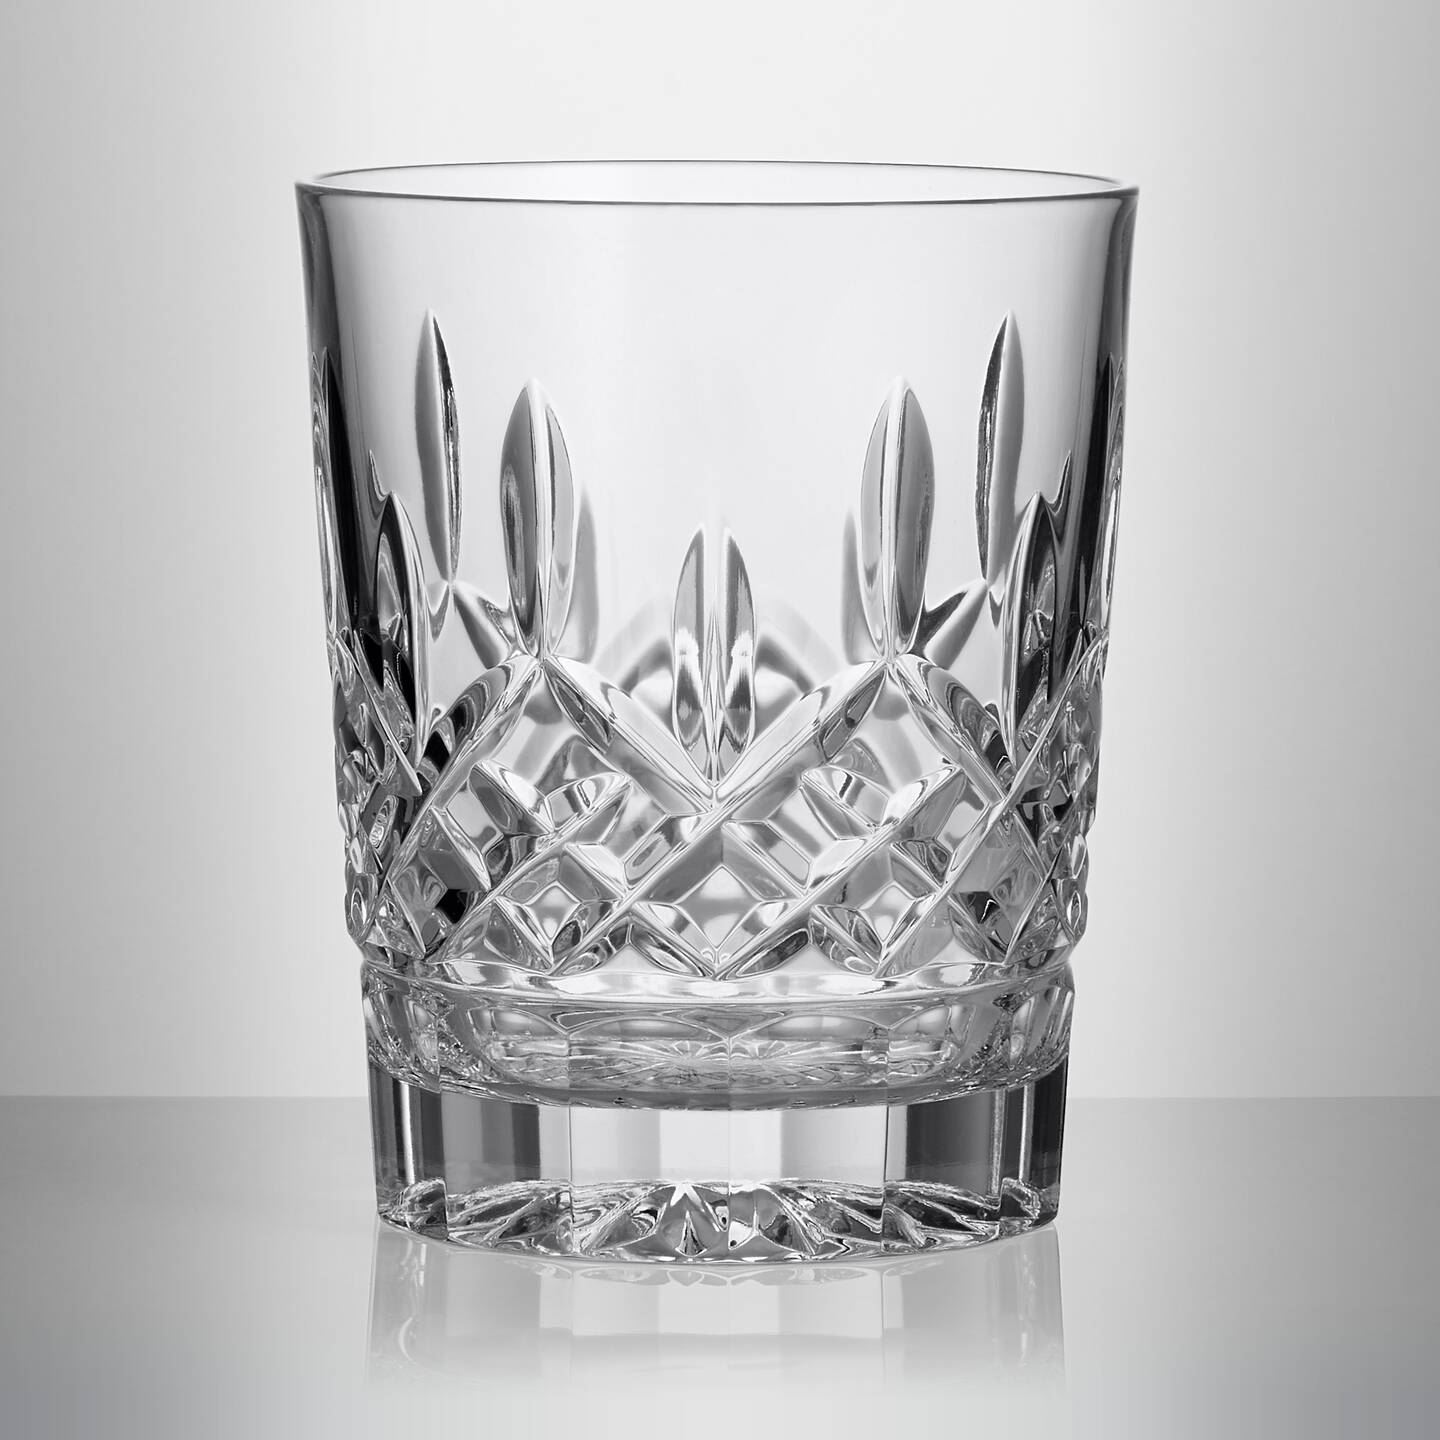 Waterford Crystal Elegance Collection - Boxed Set of Two Lager Glasses